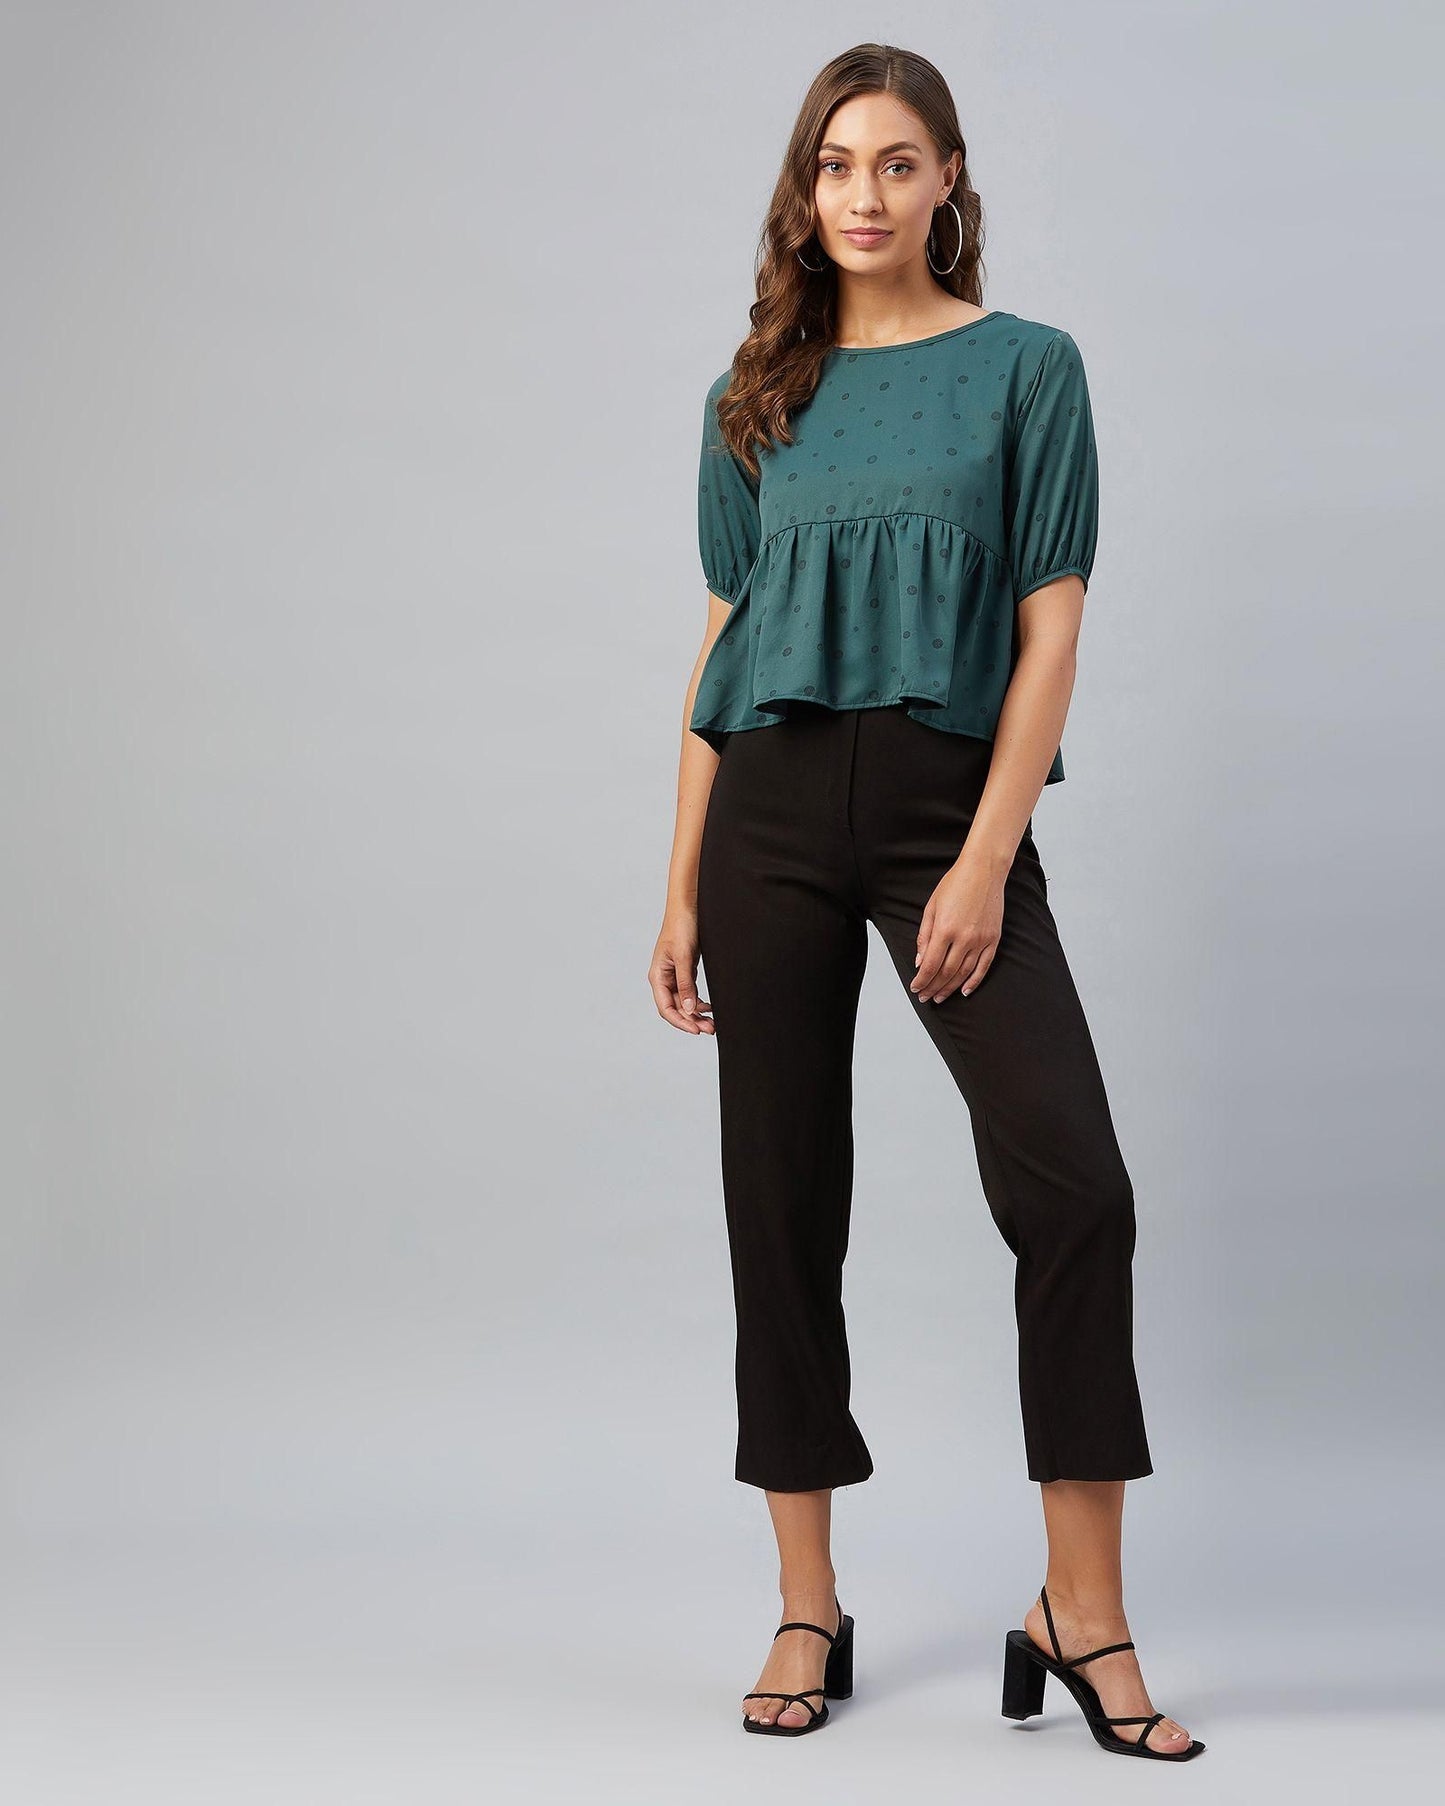 Women's Green Doted Ruffled Style Top